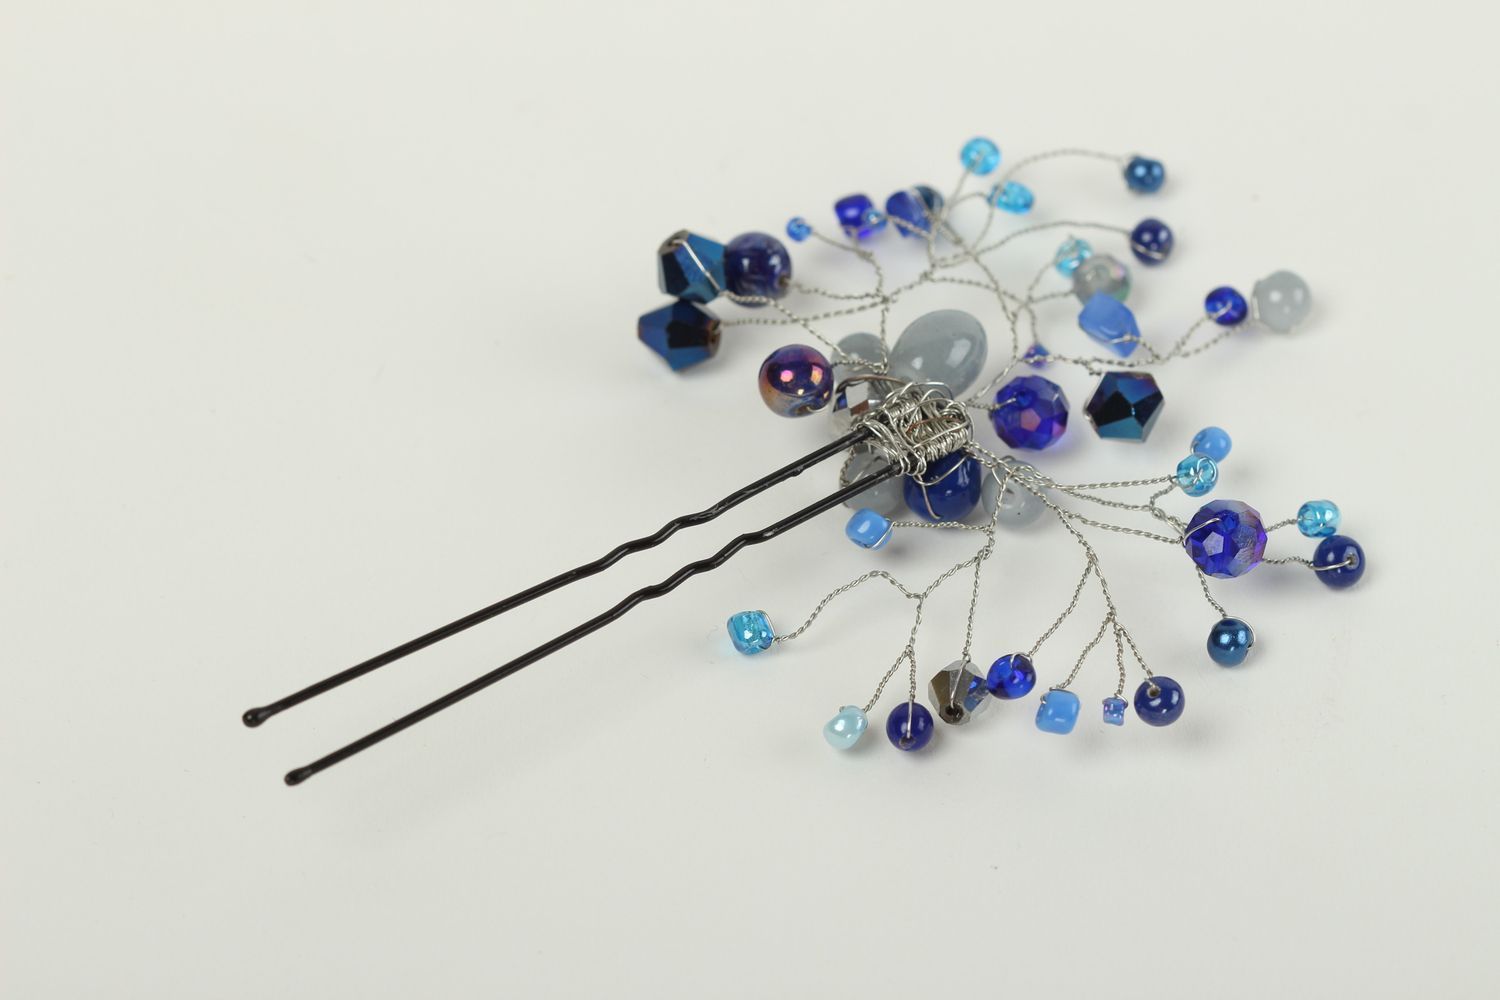 Handmade hair pin with beads hair accessories stylish jewelry for hair photo 4